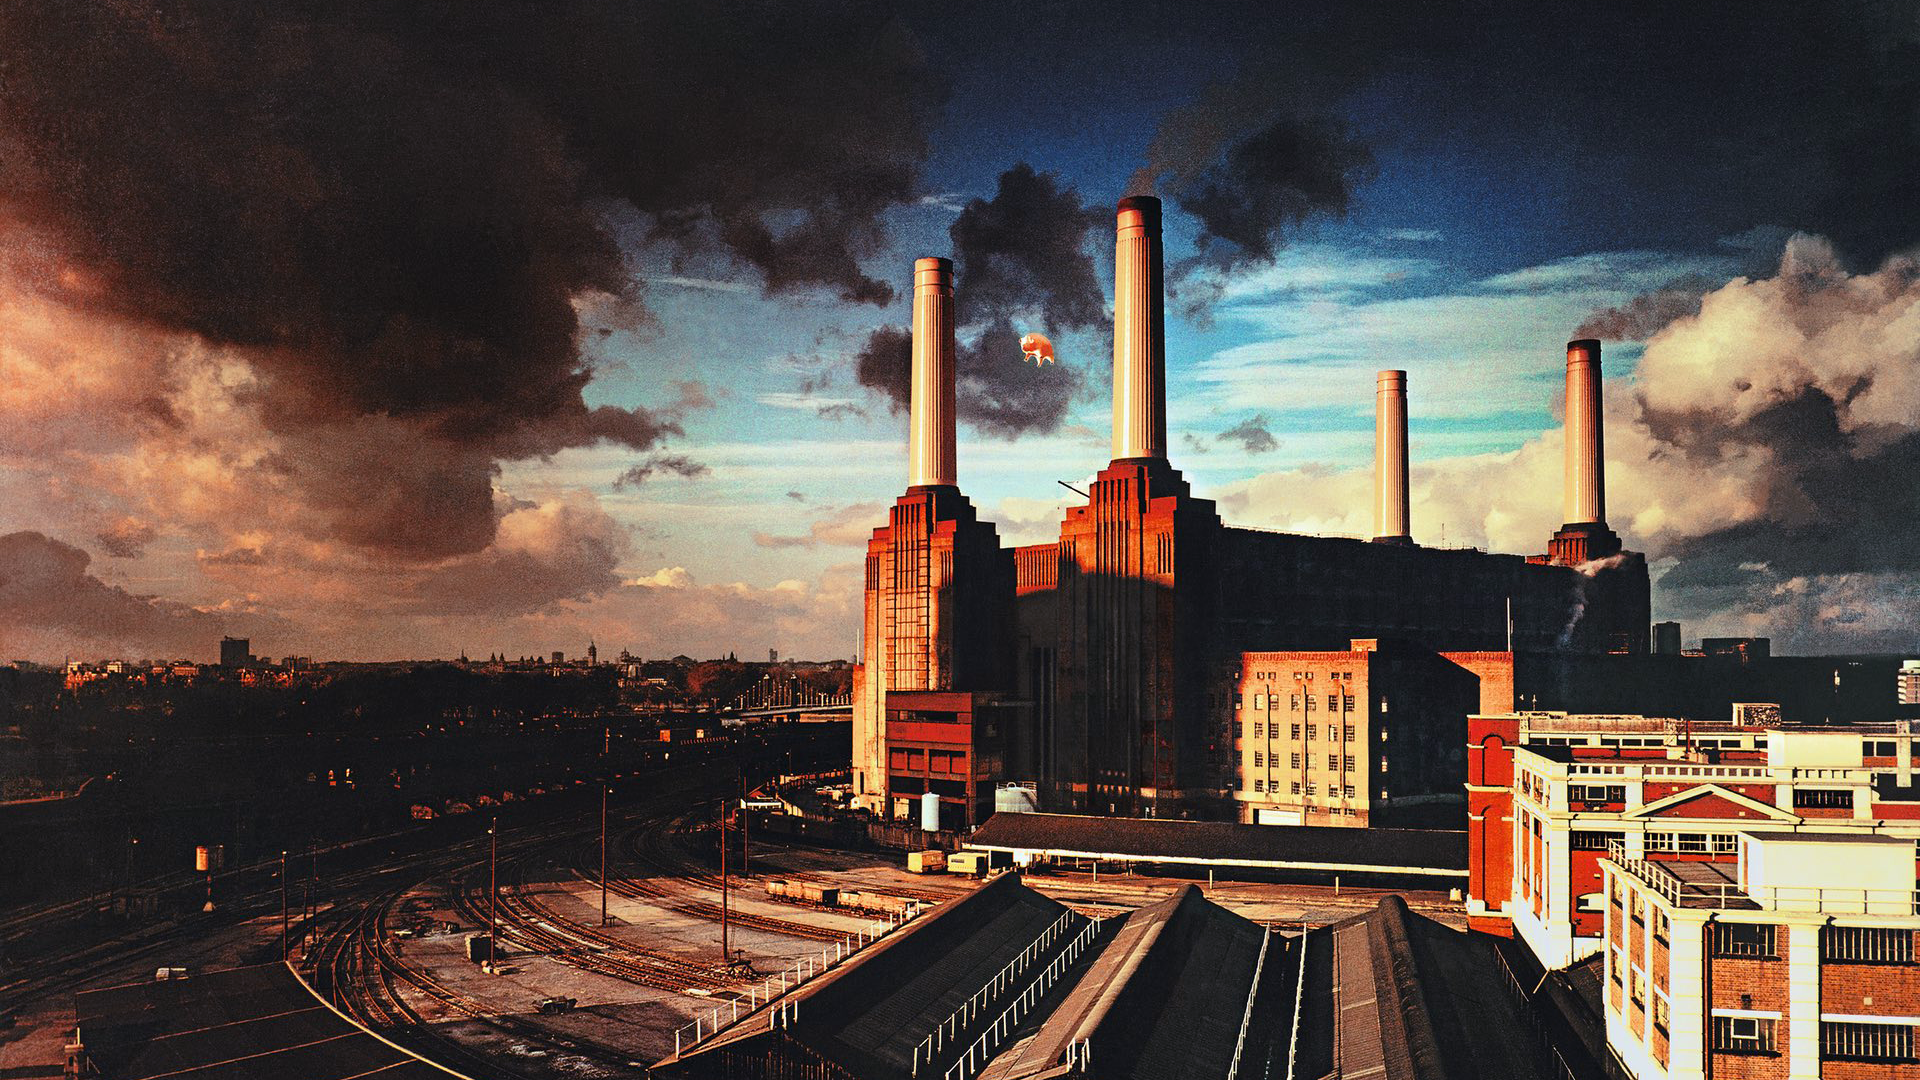 Pink Floyd (3 Different Versions) [1920x1080]